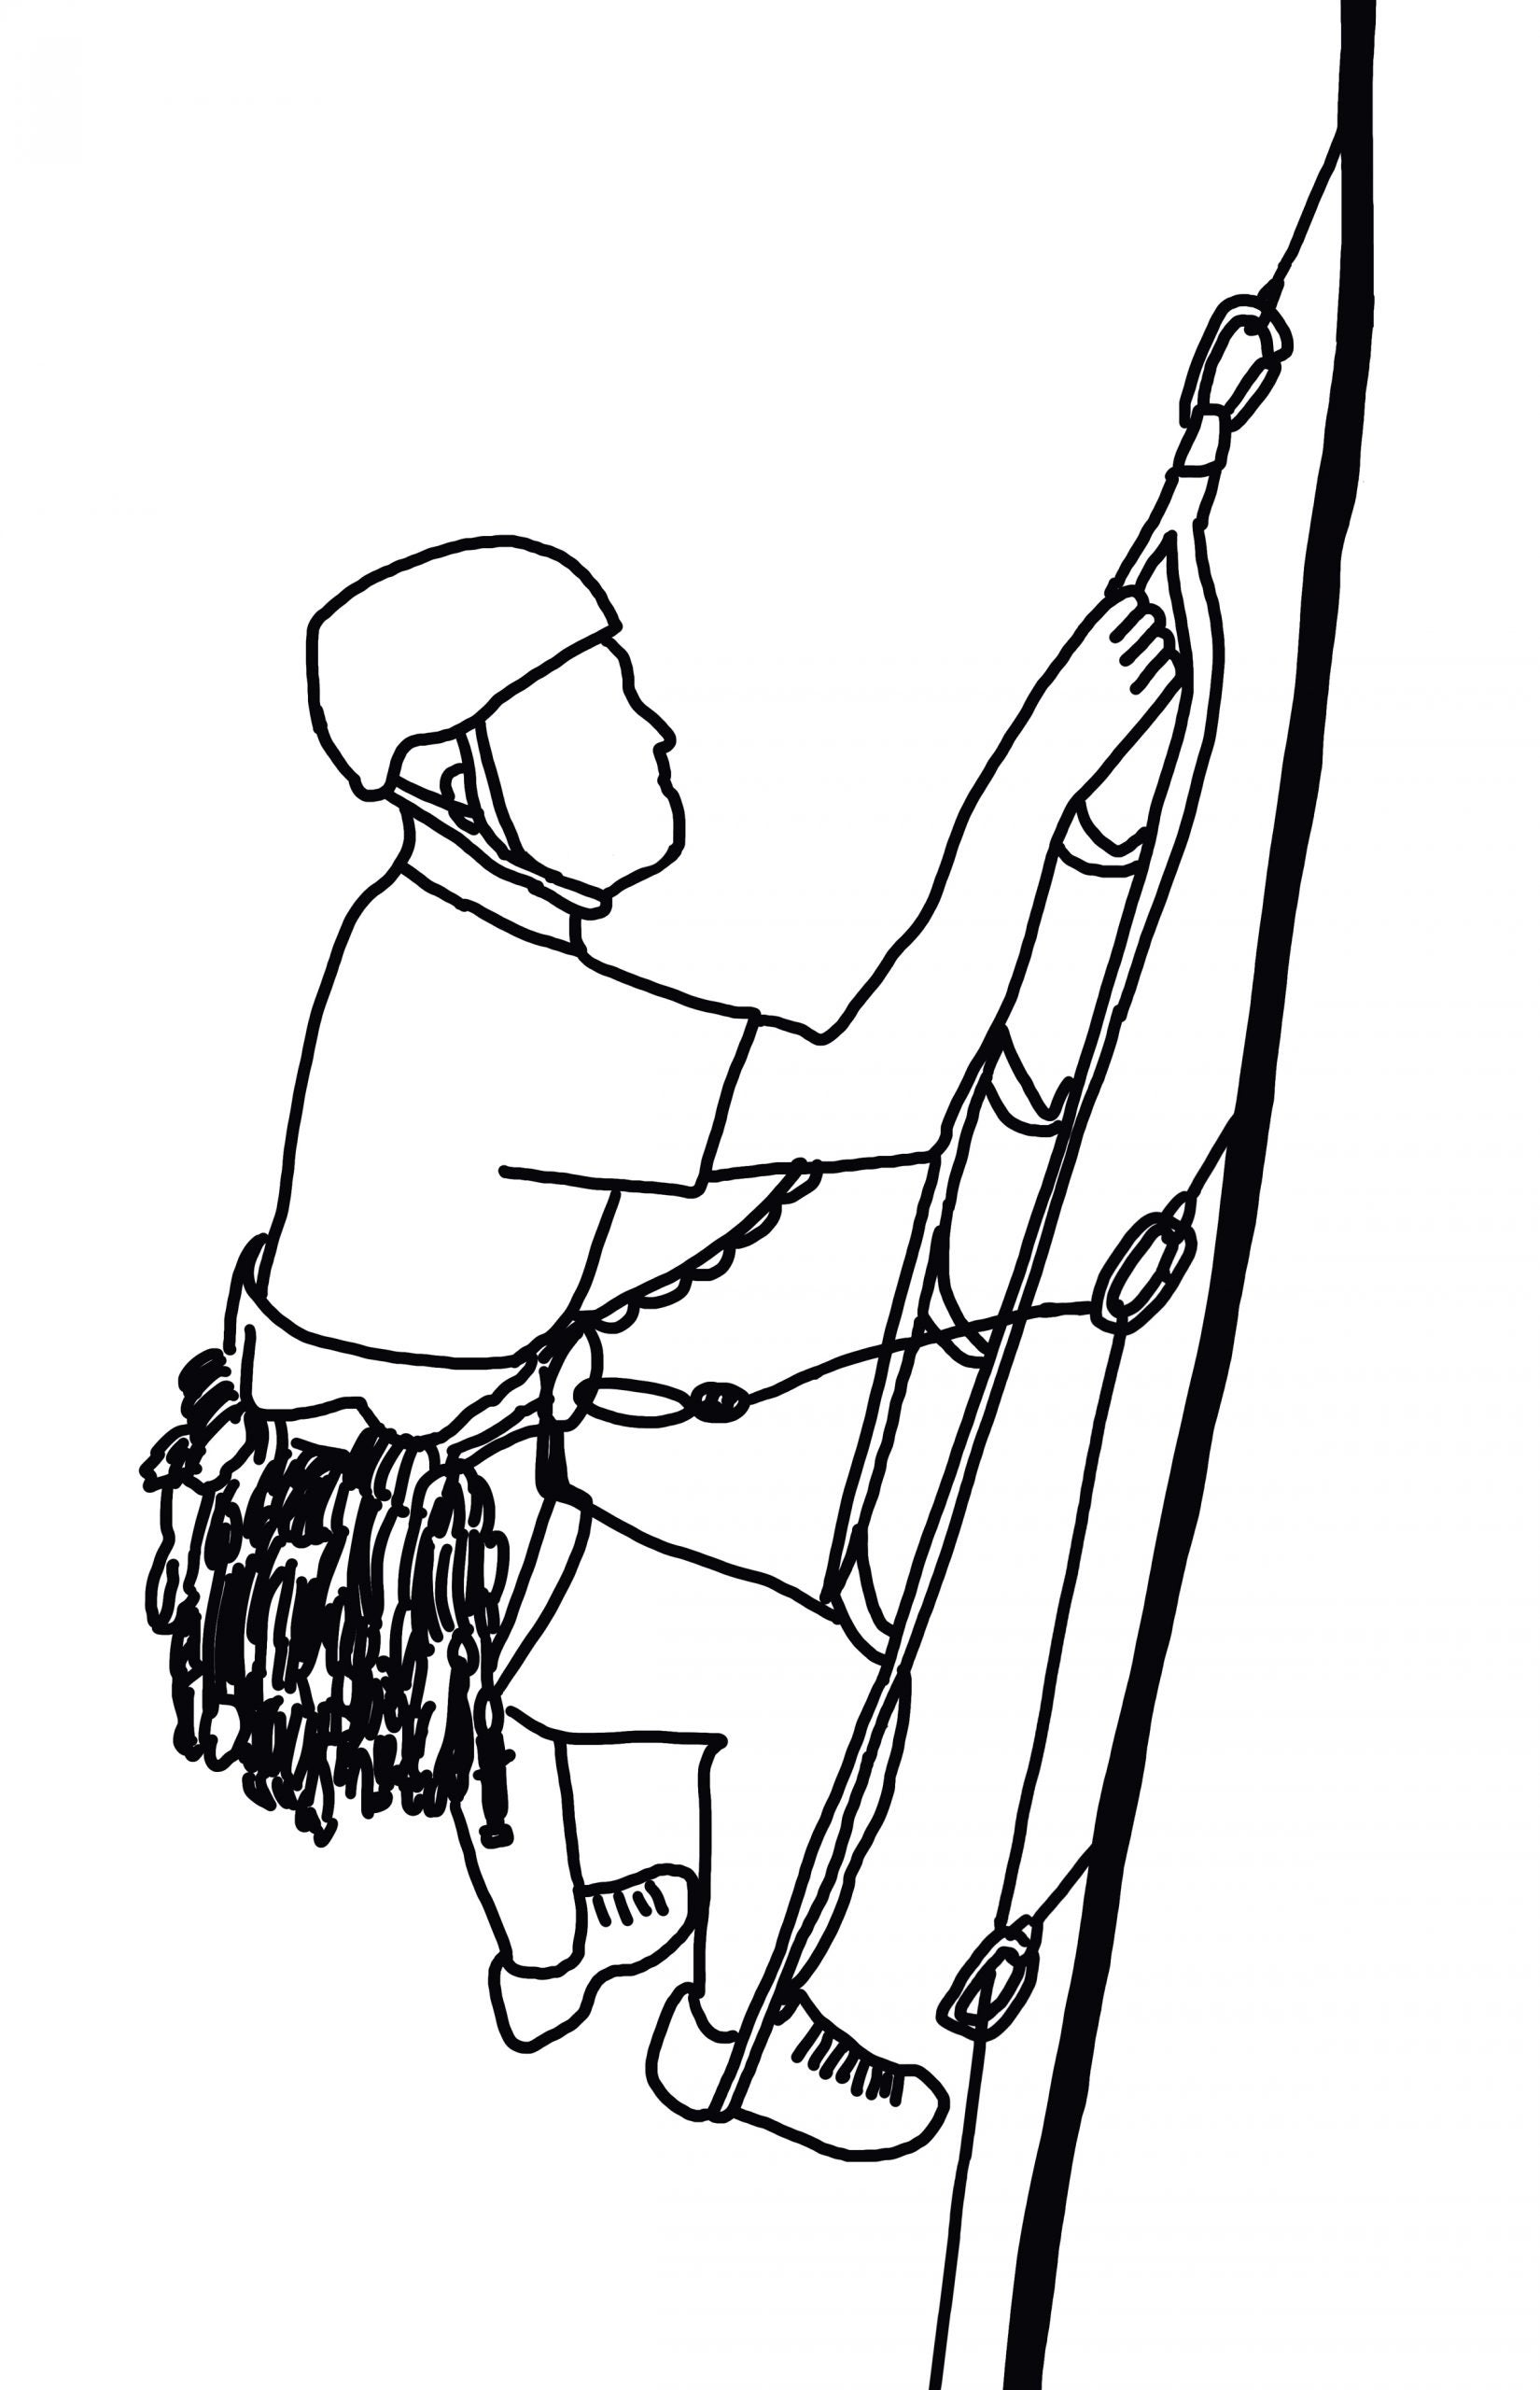 Rock Climbing- handipoints coloring page | Sports coloring pages, Coloring  pages, Coloring book pages